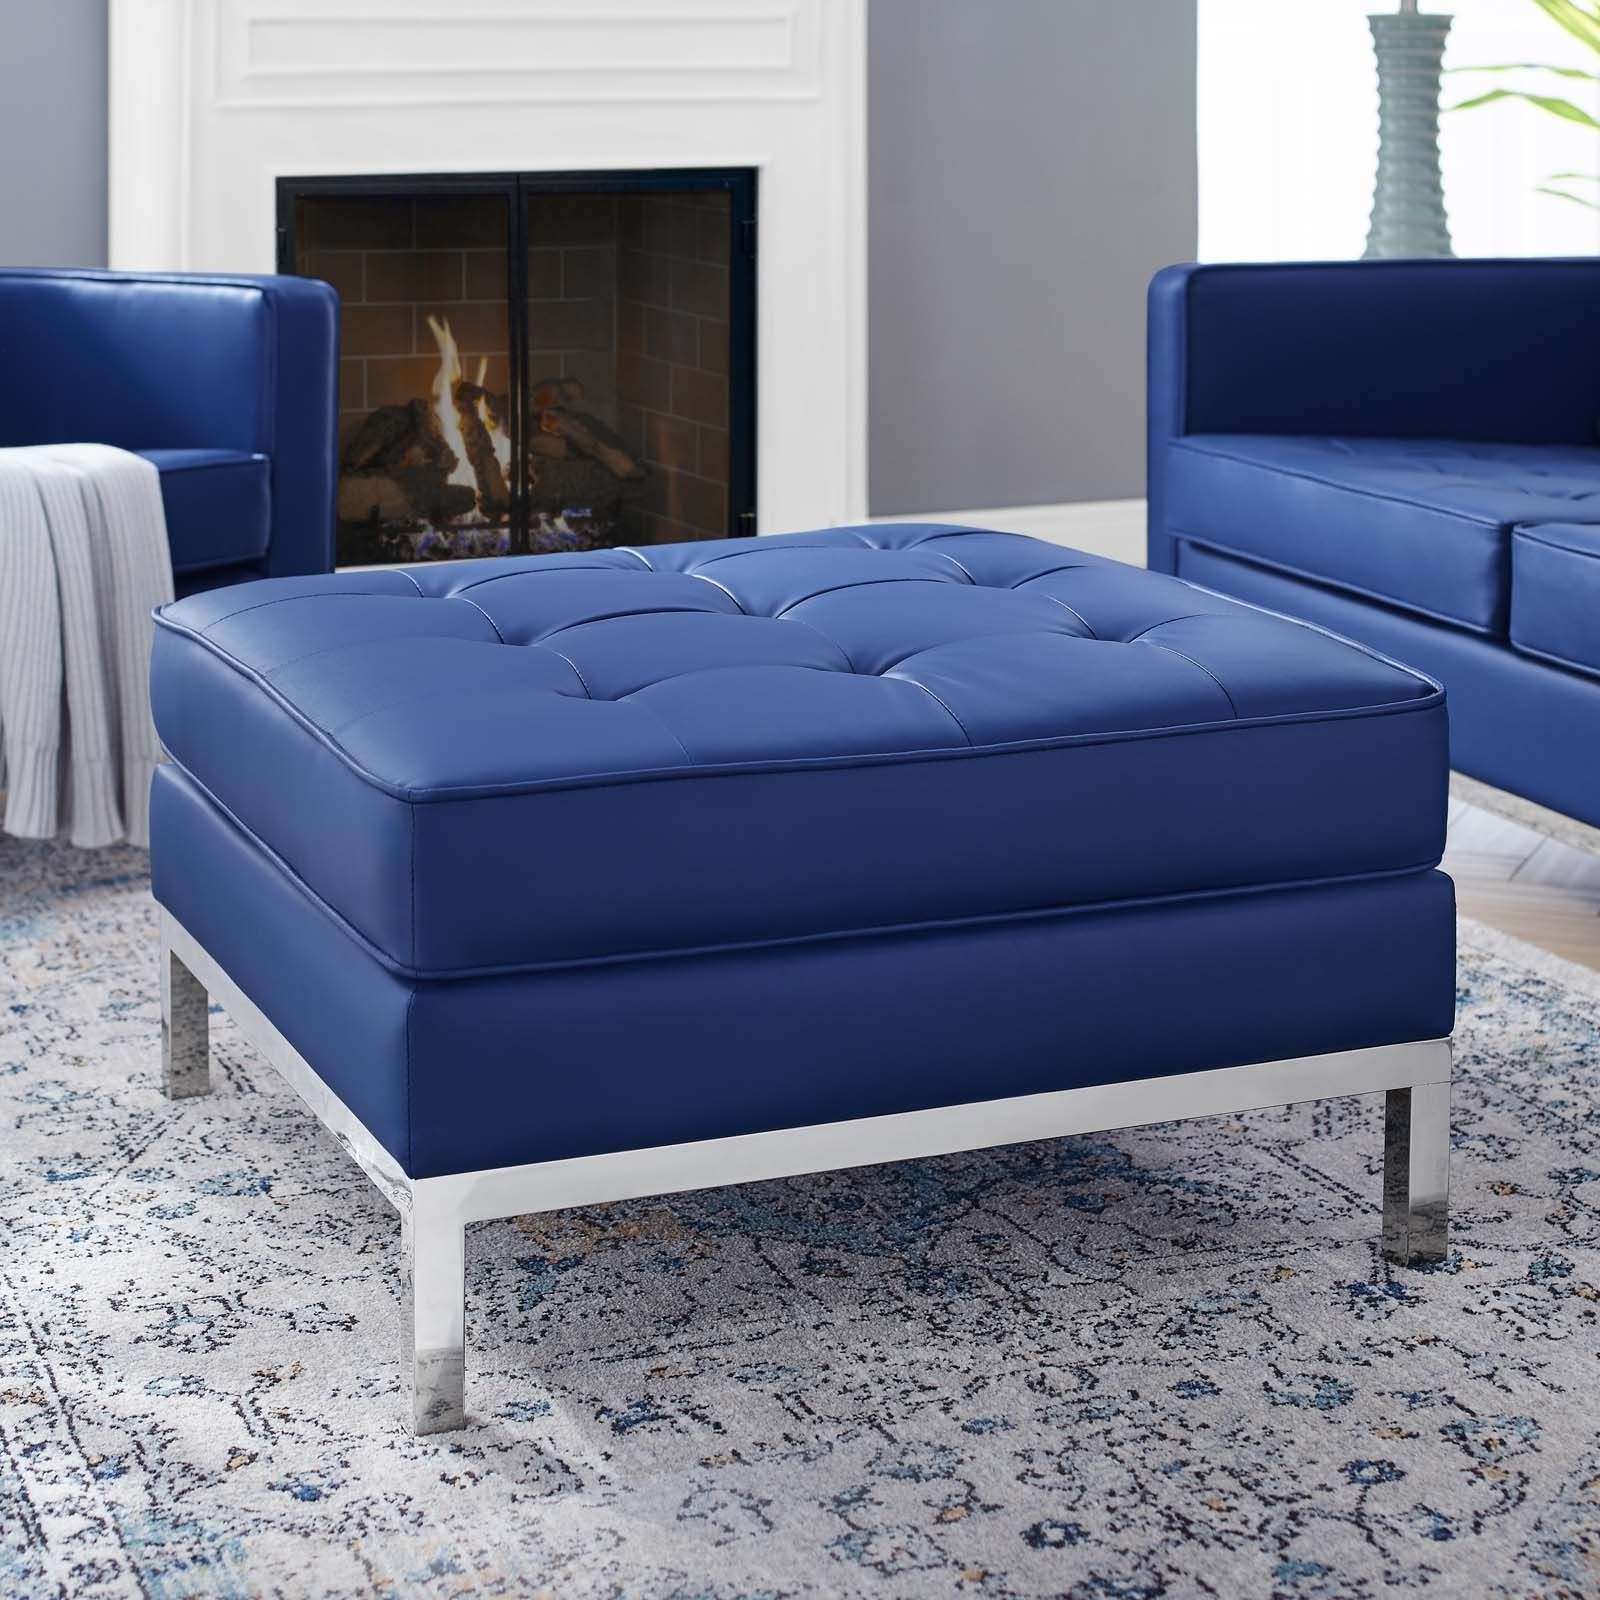 Loft Tufted Upholstered Faux Leather Ottoman In Silver Navy – Hyme With Regard To Most Recent Silver Faux Leather Ottomans With Pull Tab (View 5 of 10)